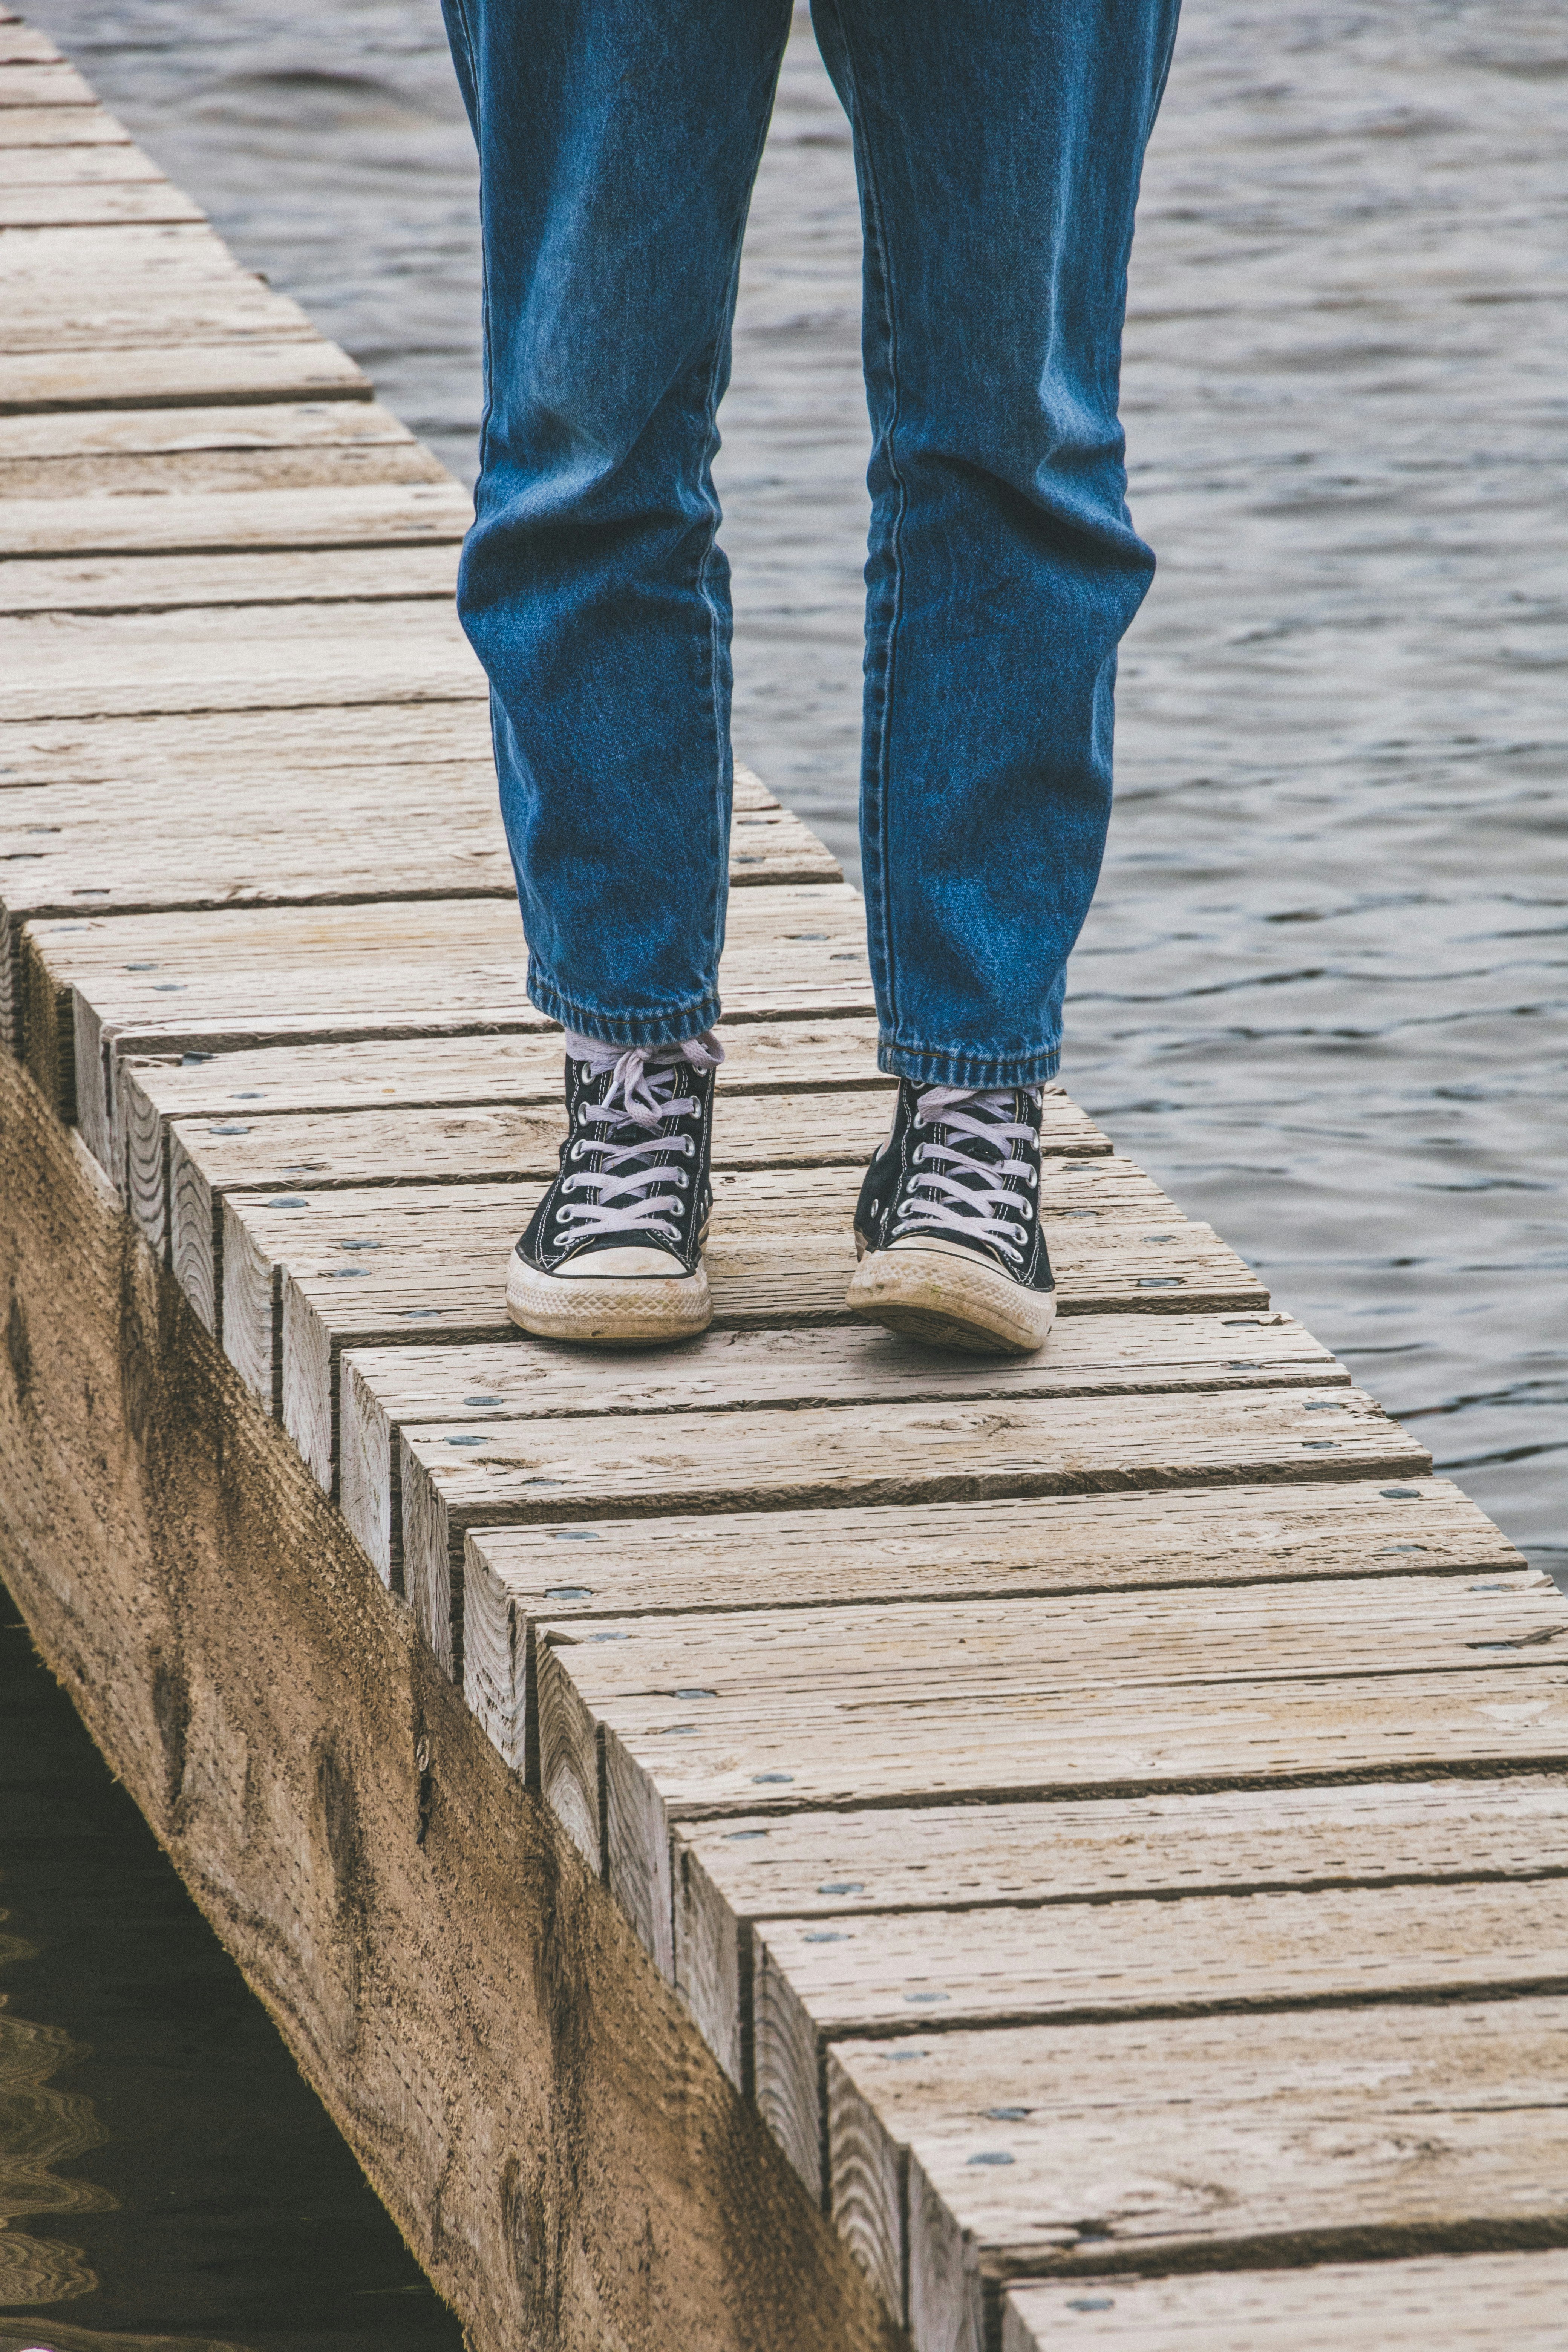 person in blue denim jeans and white and black sneakers standing on wooden dock